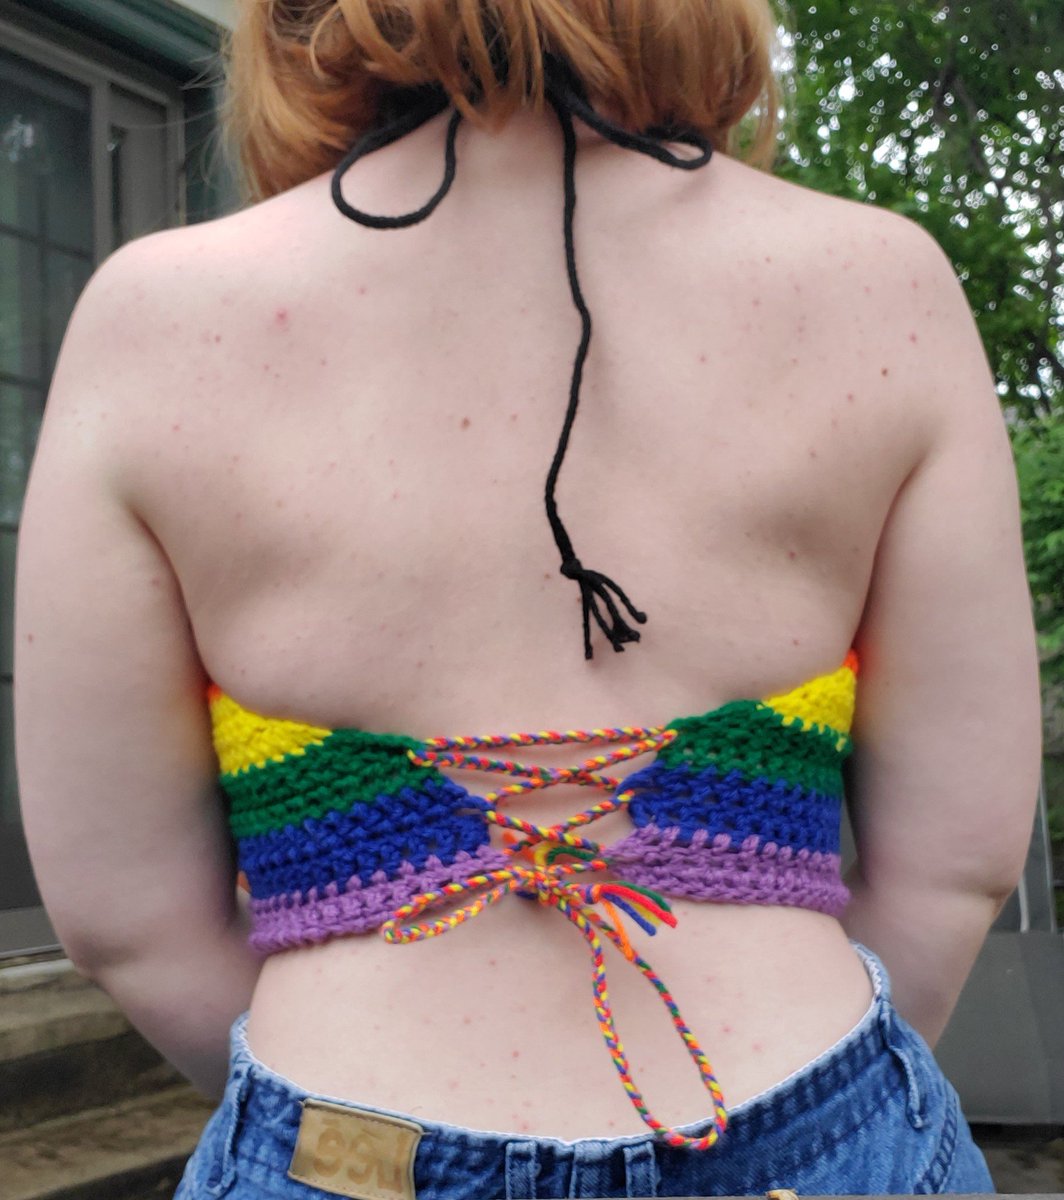 rainbow pride flag halter $20 + $5 shippingsize mediummodel wears size 32Dlaces up in back and around neck for flexible sizing